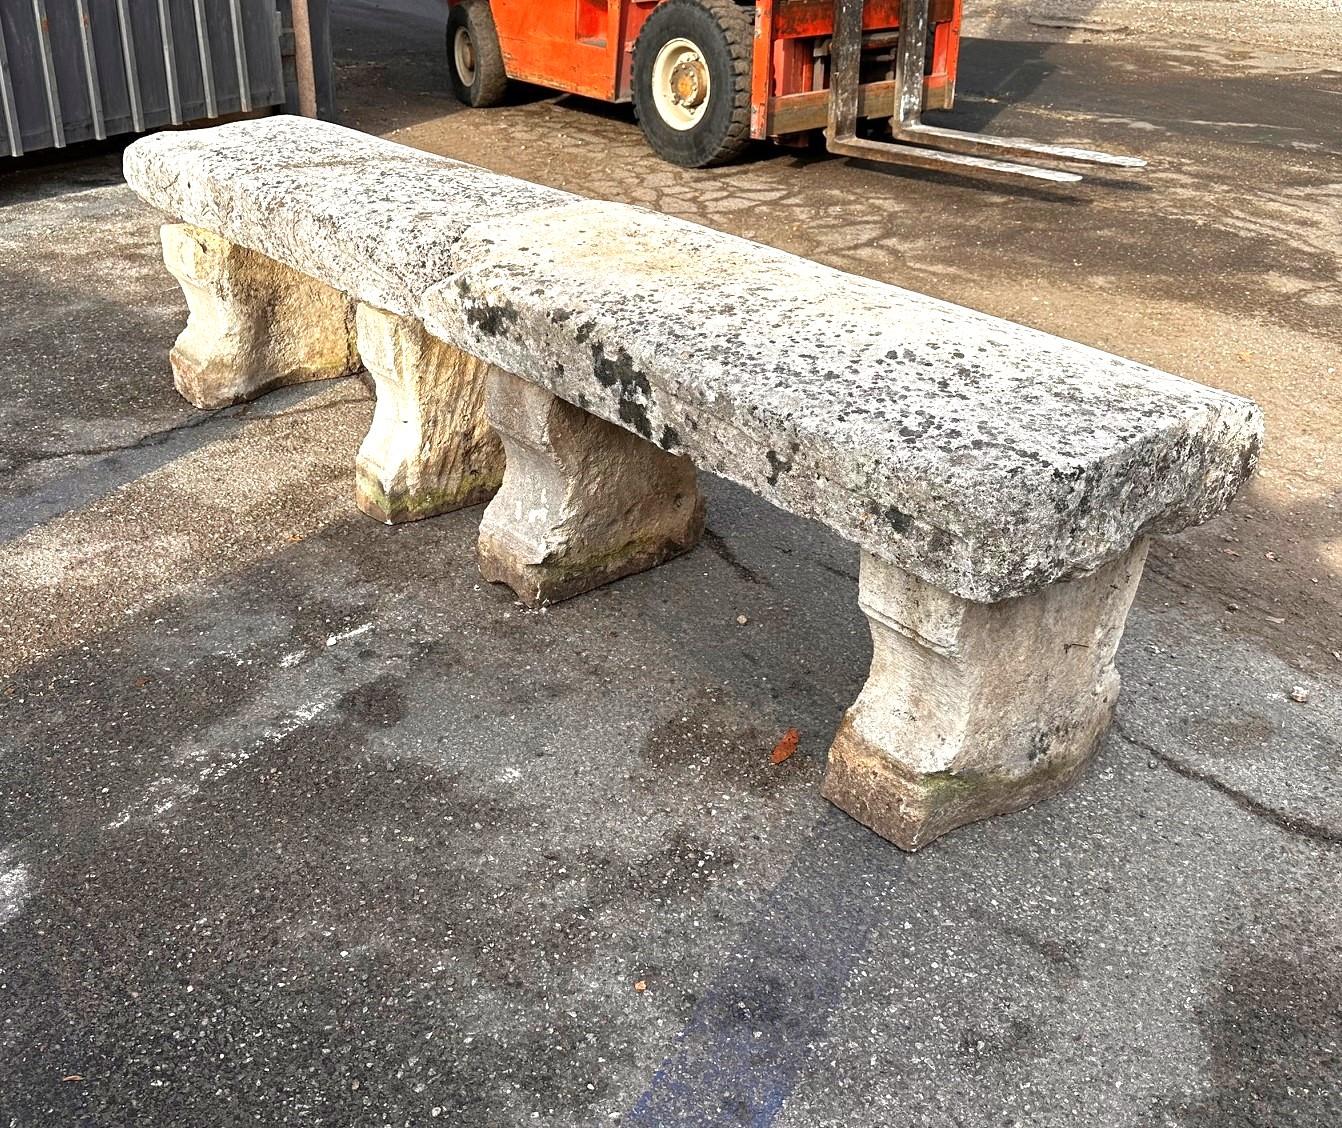 TWO Hand Carved Stone Rustic Garden Bench Seat Antique Indoor Outdoor Landscape . Hand carved stone rustic Chateau park garden benches . Imposing and Very long placed side by side or separately as seen in the pictures.  18th century of the Period